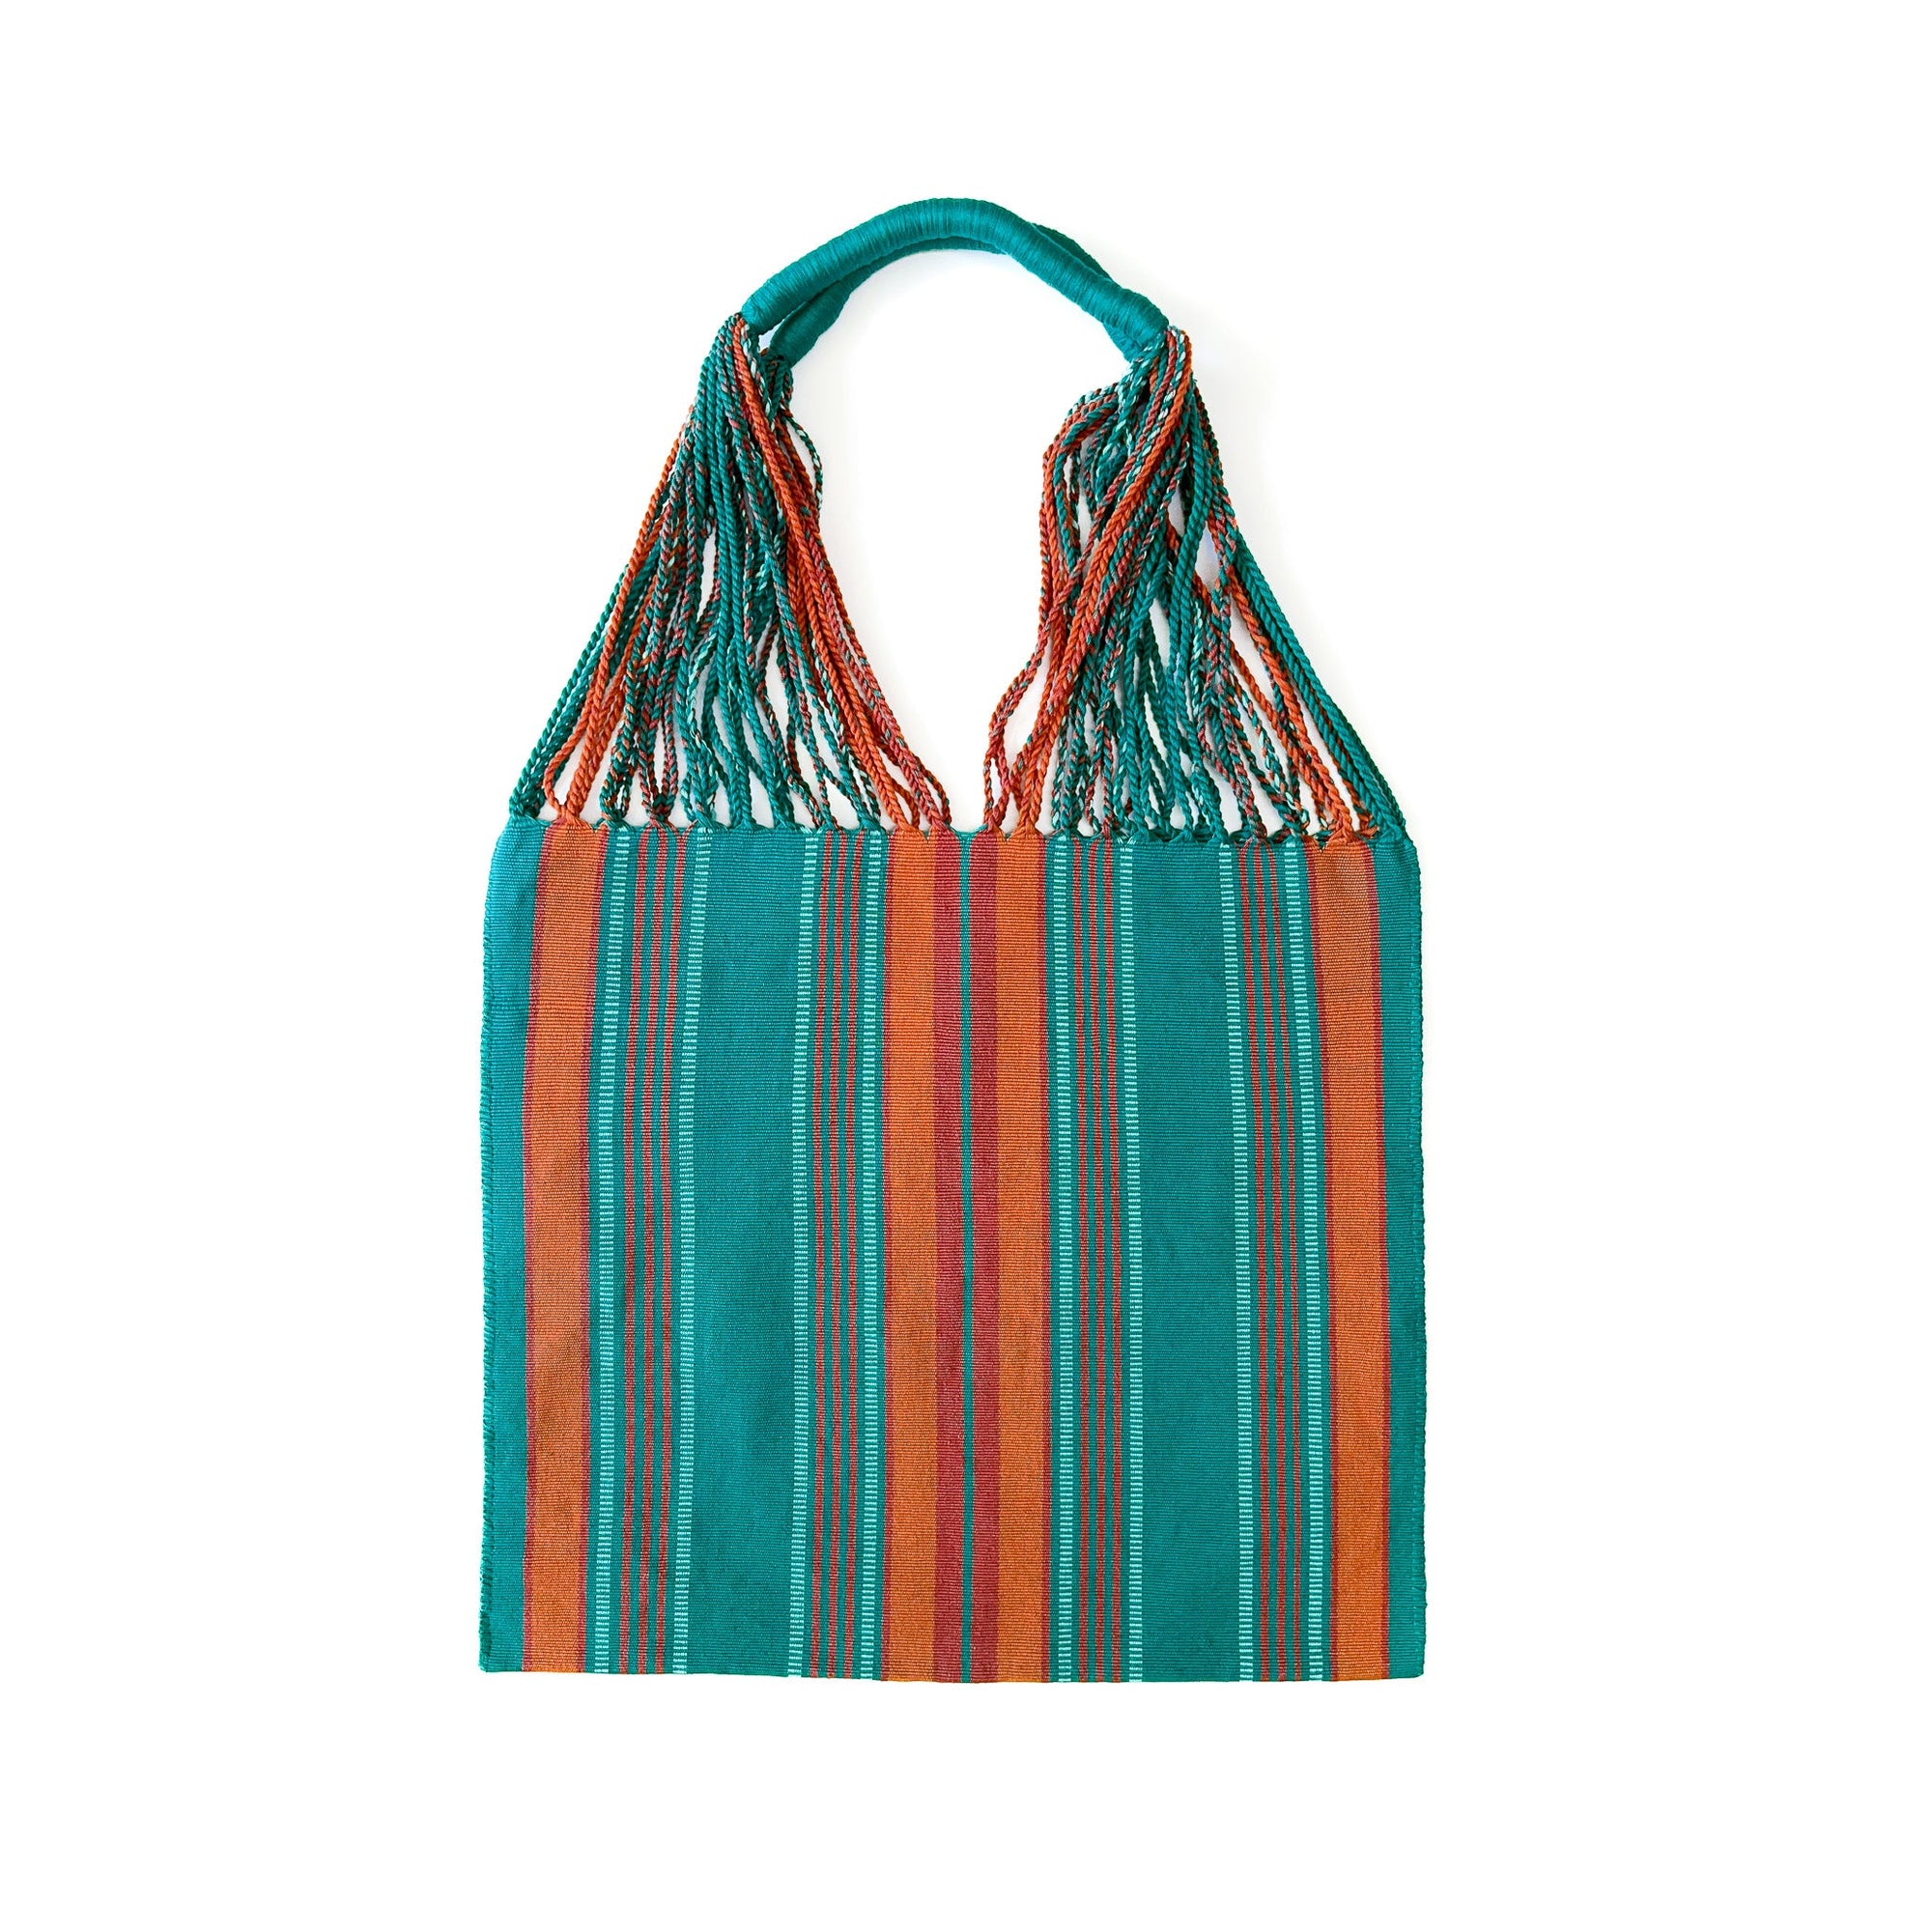 Vibrant orange and teal handwoven market bag made in Guatemala, with a striped fabric body and twisted straps, against a white background